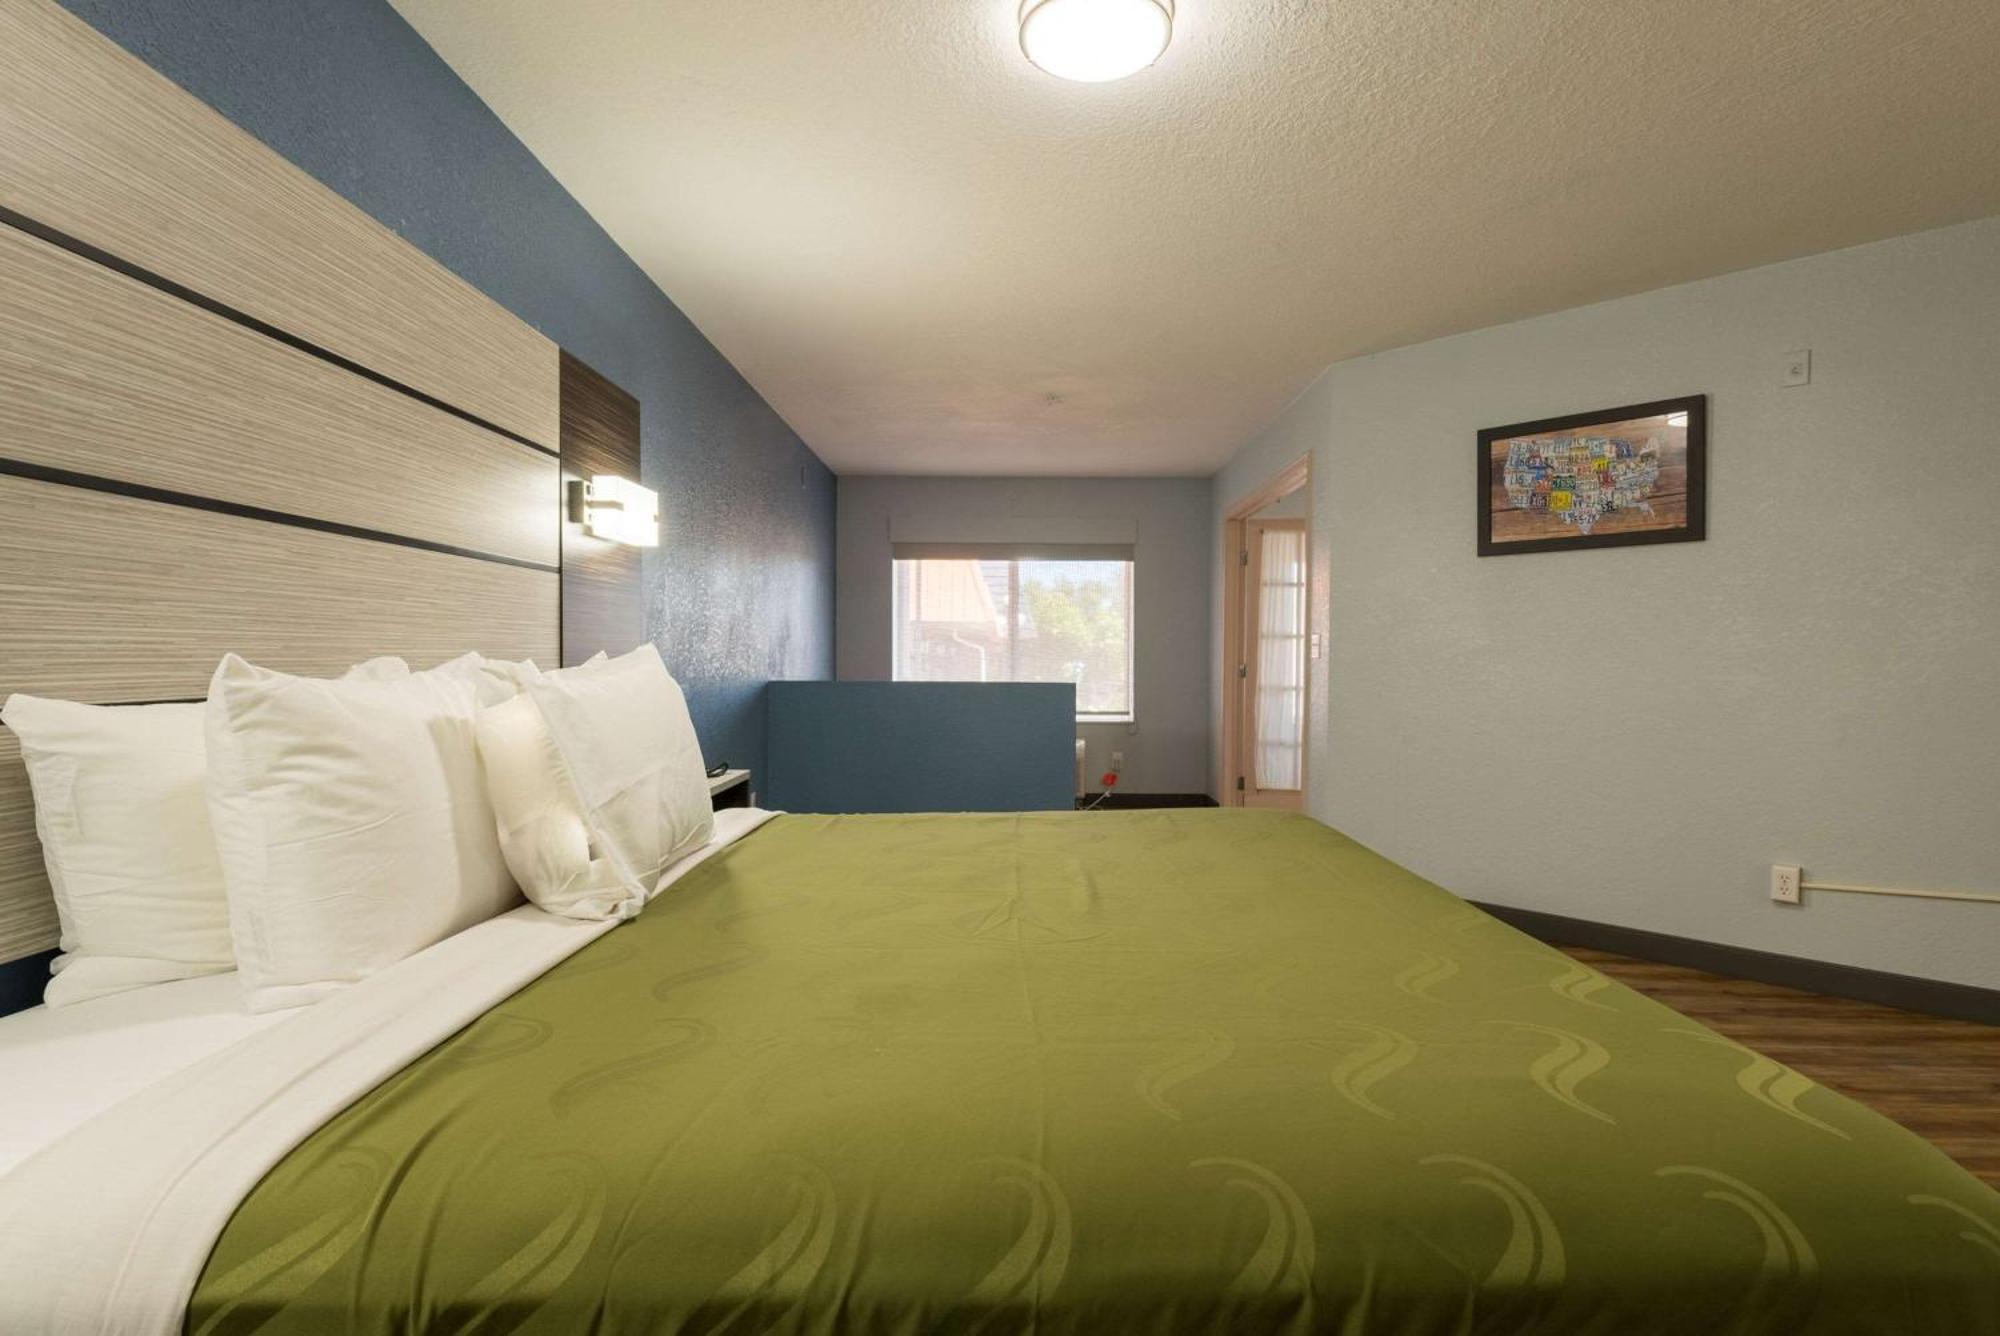 Quality Inn & Suites Manitou Springs At Pikes Peak Экстерьер фото